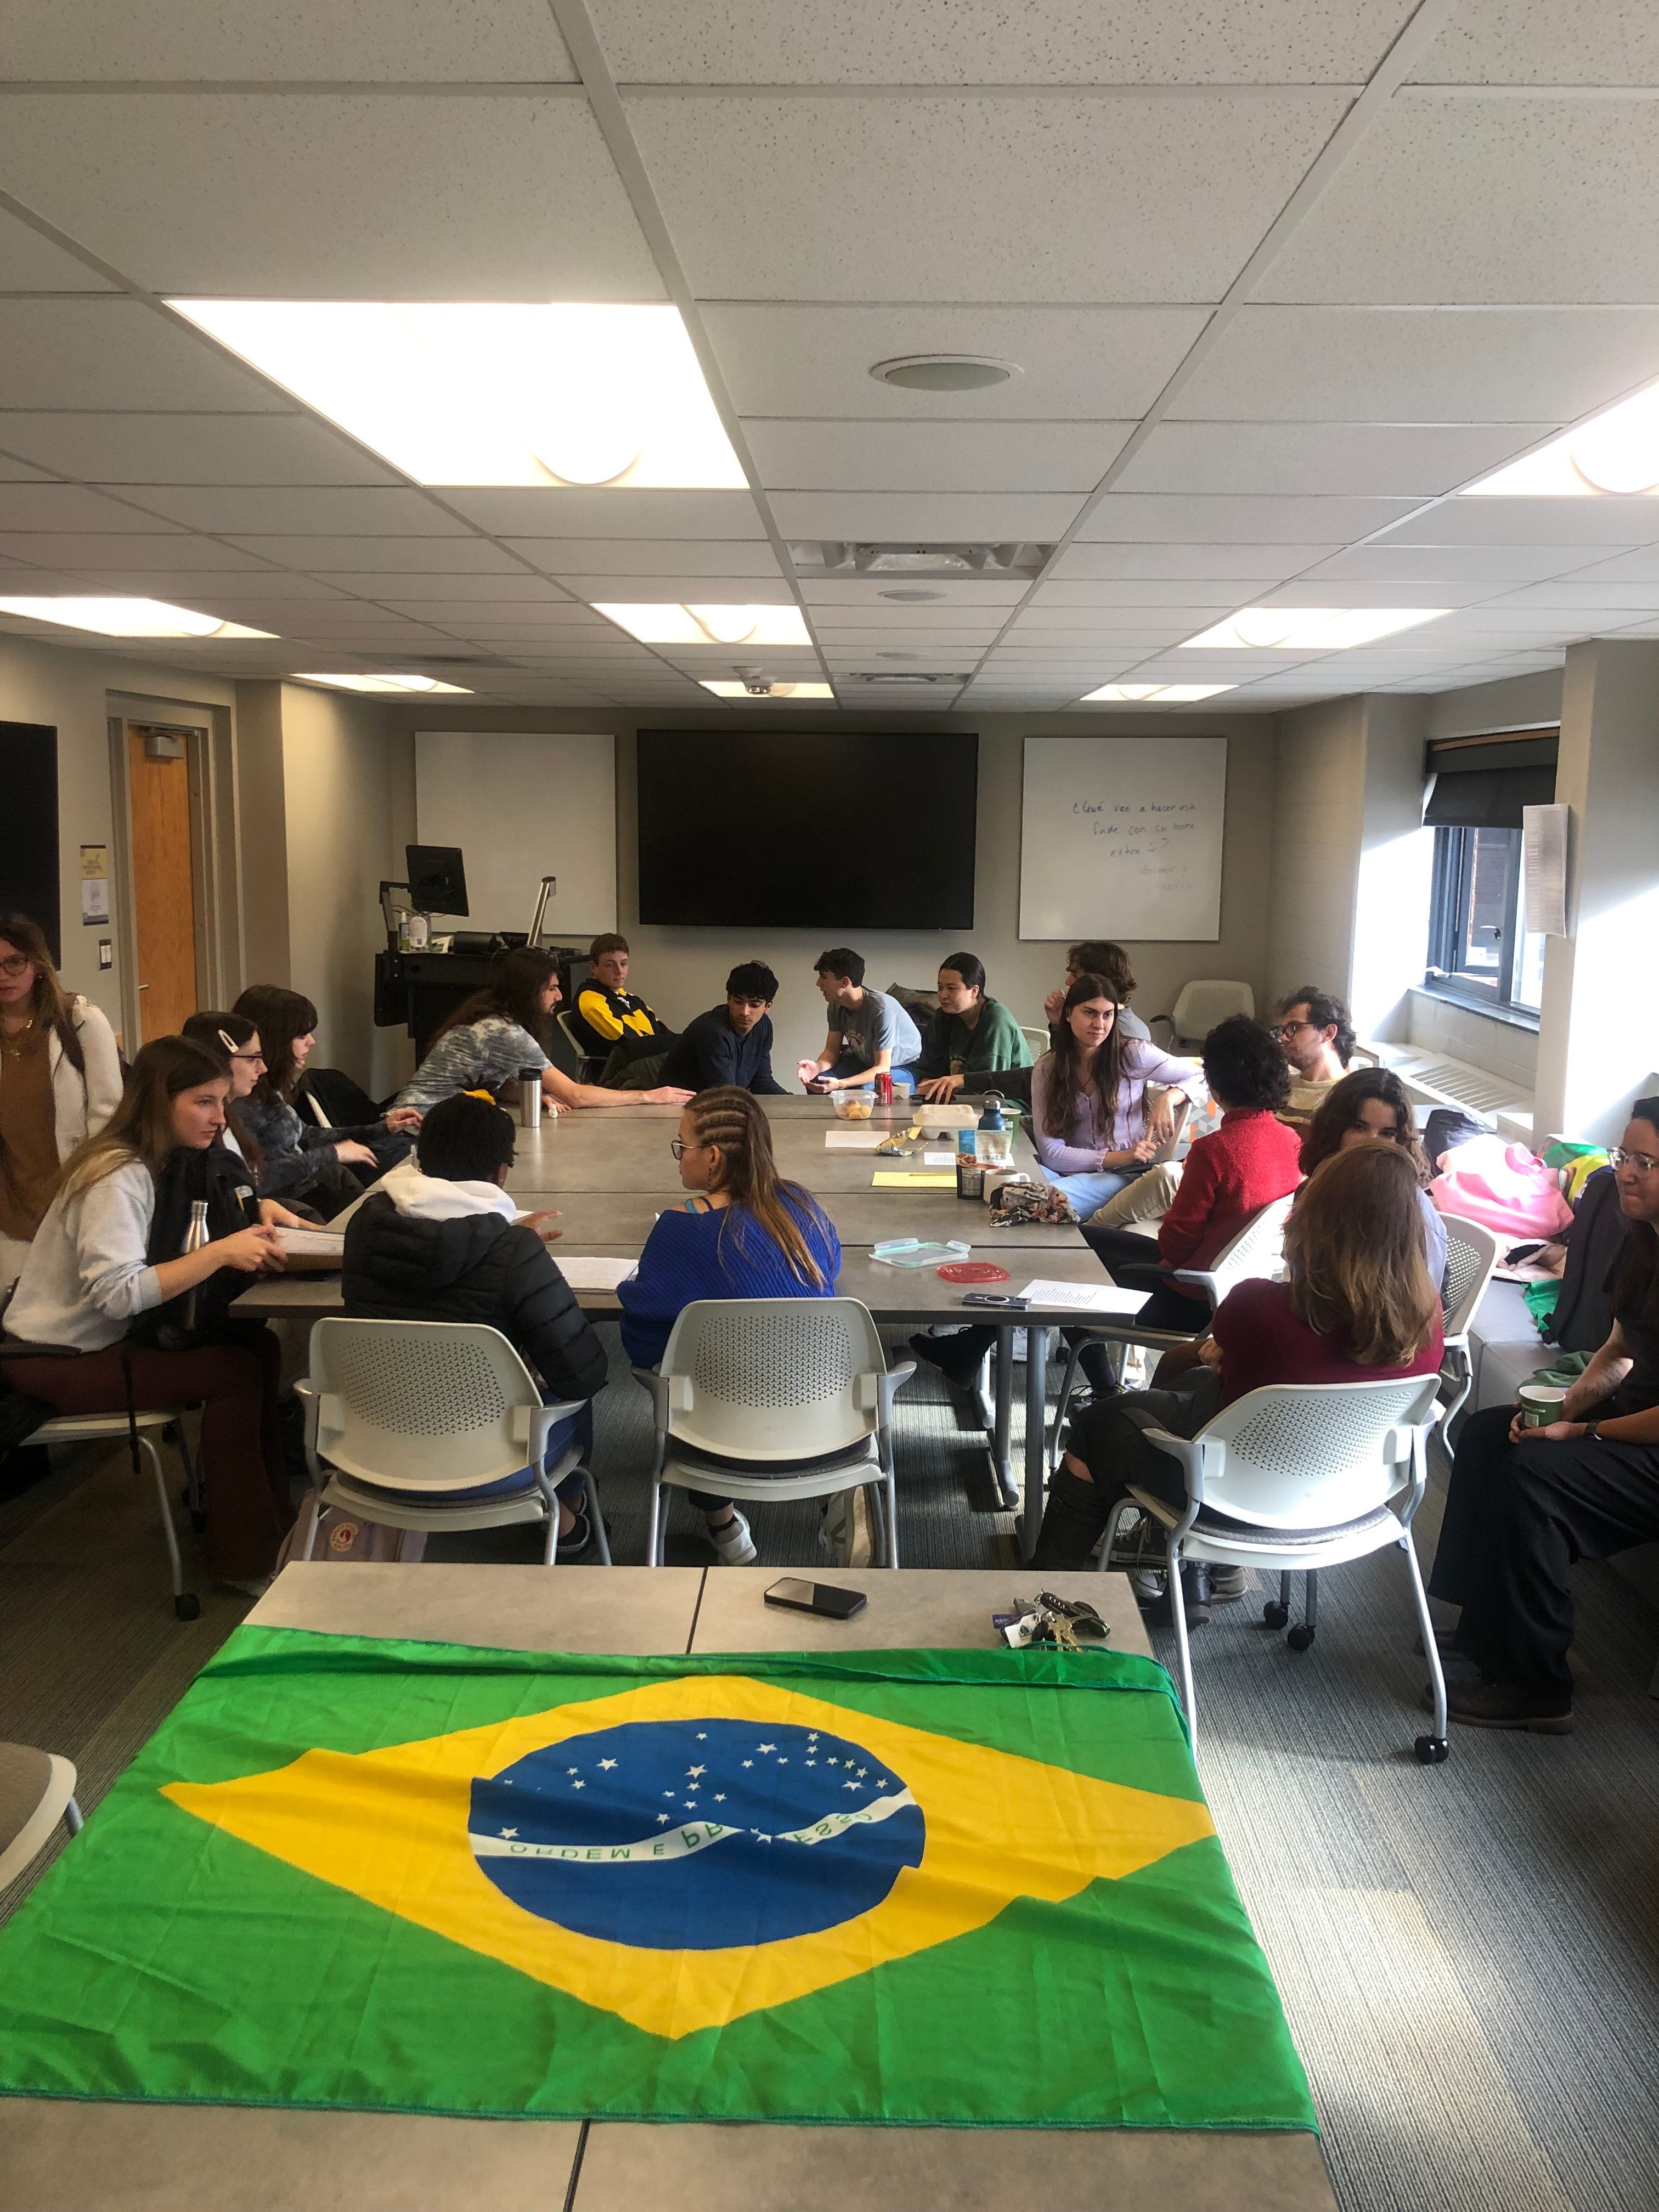 Portuguese Students chat around a table with the flag of Brazil in the forefront